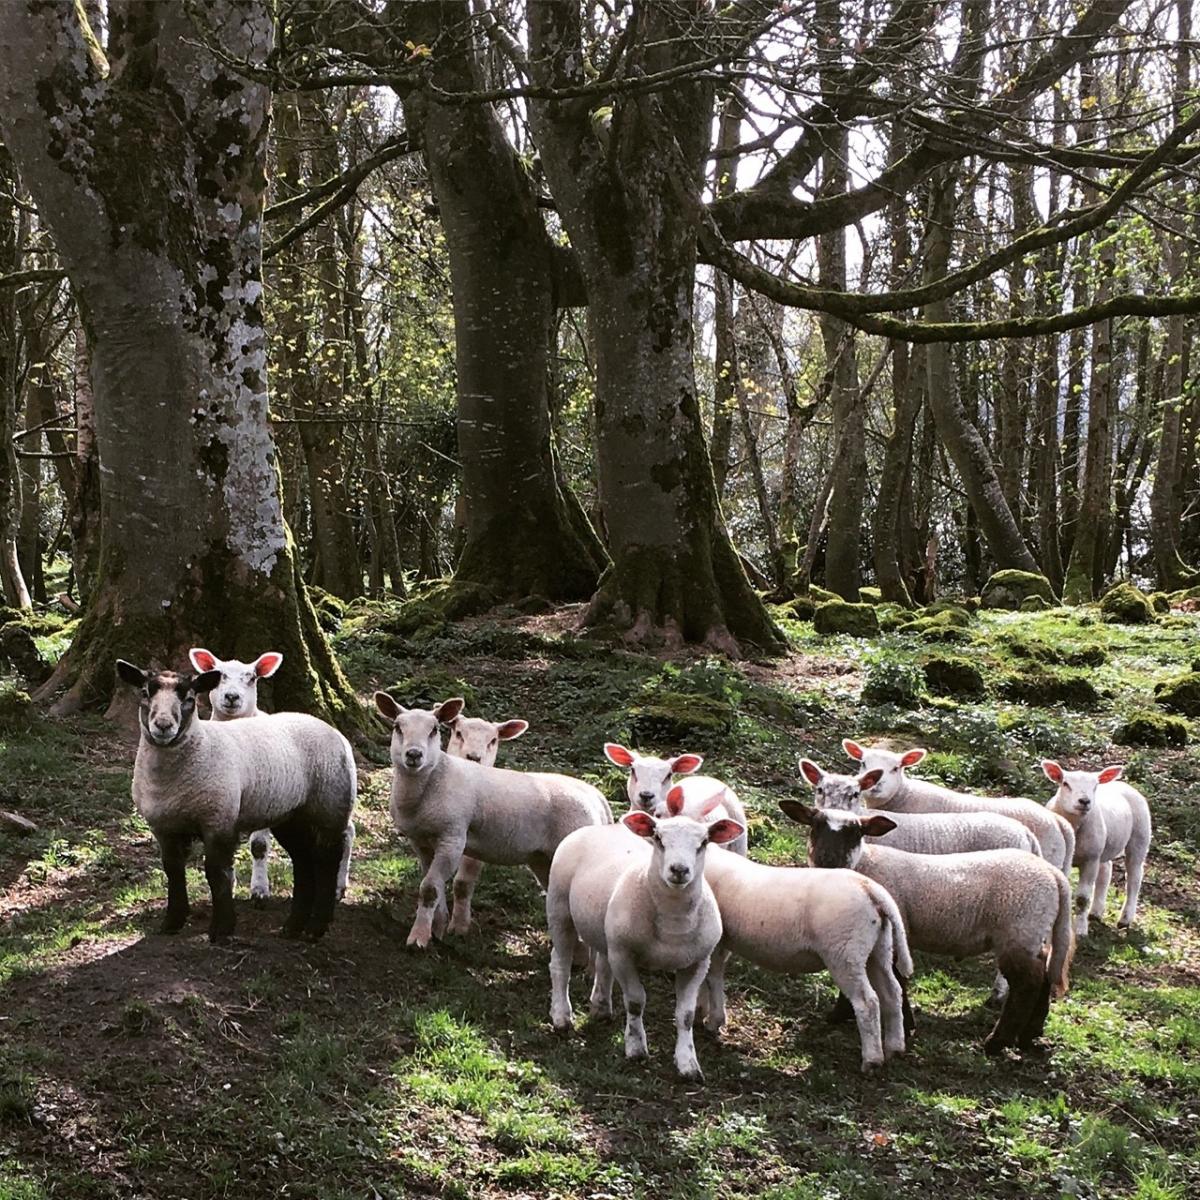 Claire Rowe - If you go down to the woods today…. Sheltering from the showers, our lambs by Lough Erne, Fermanagh